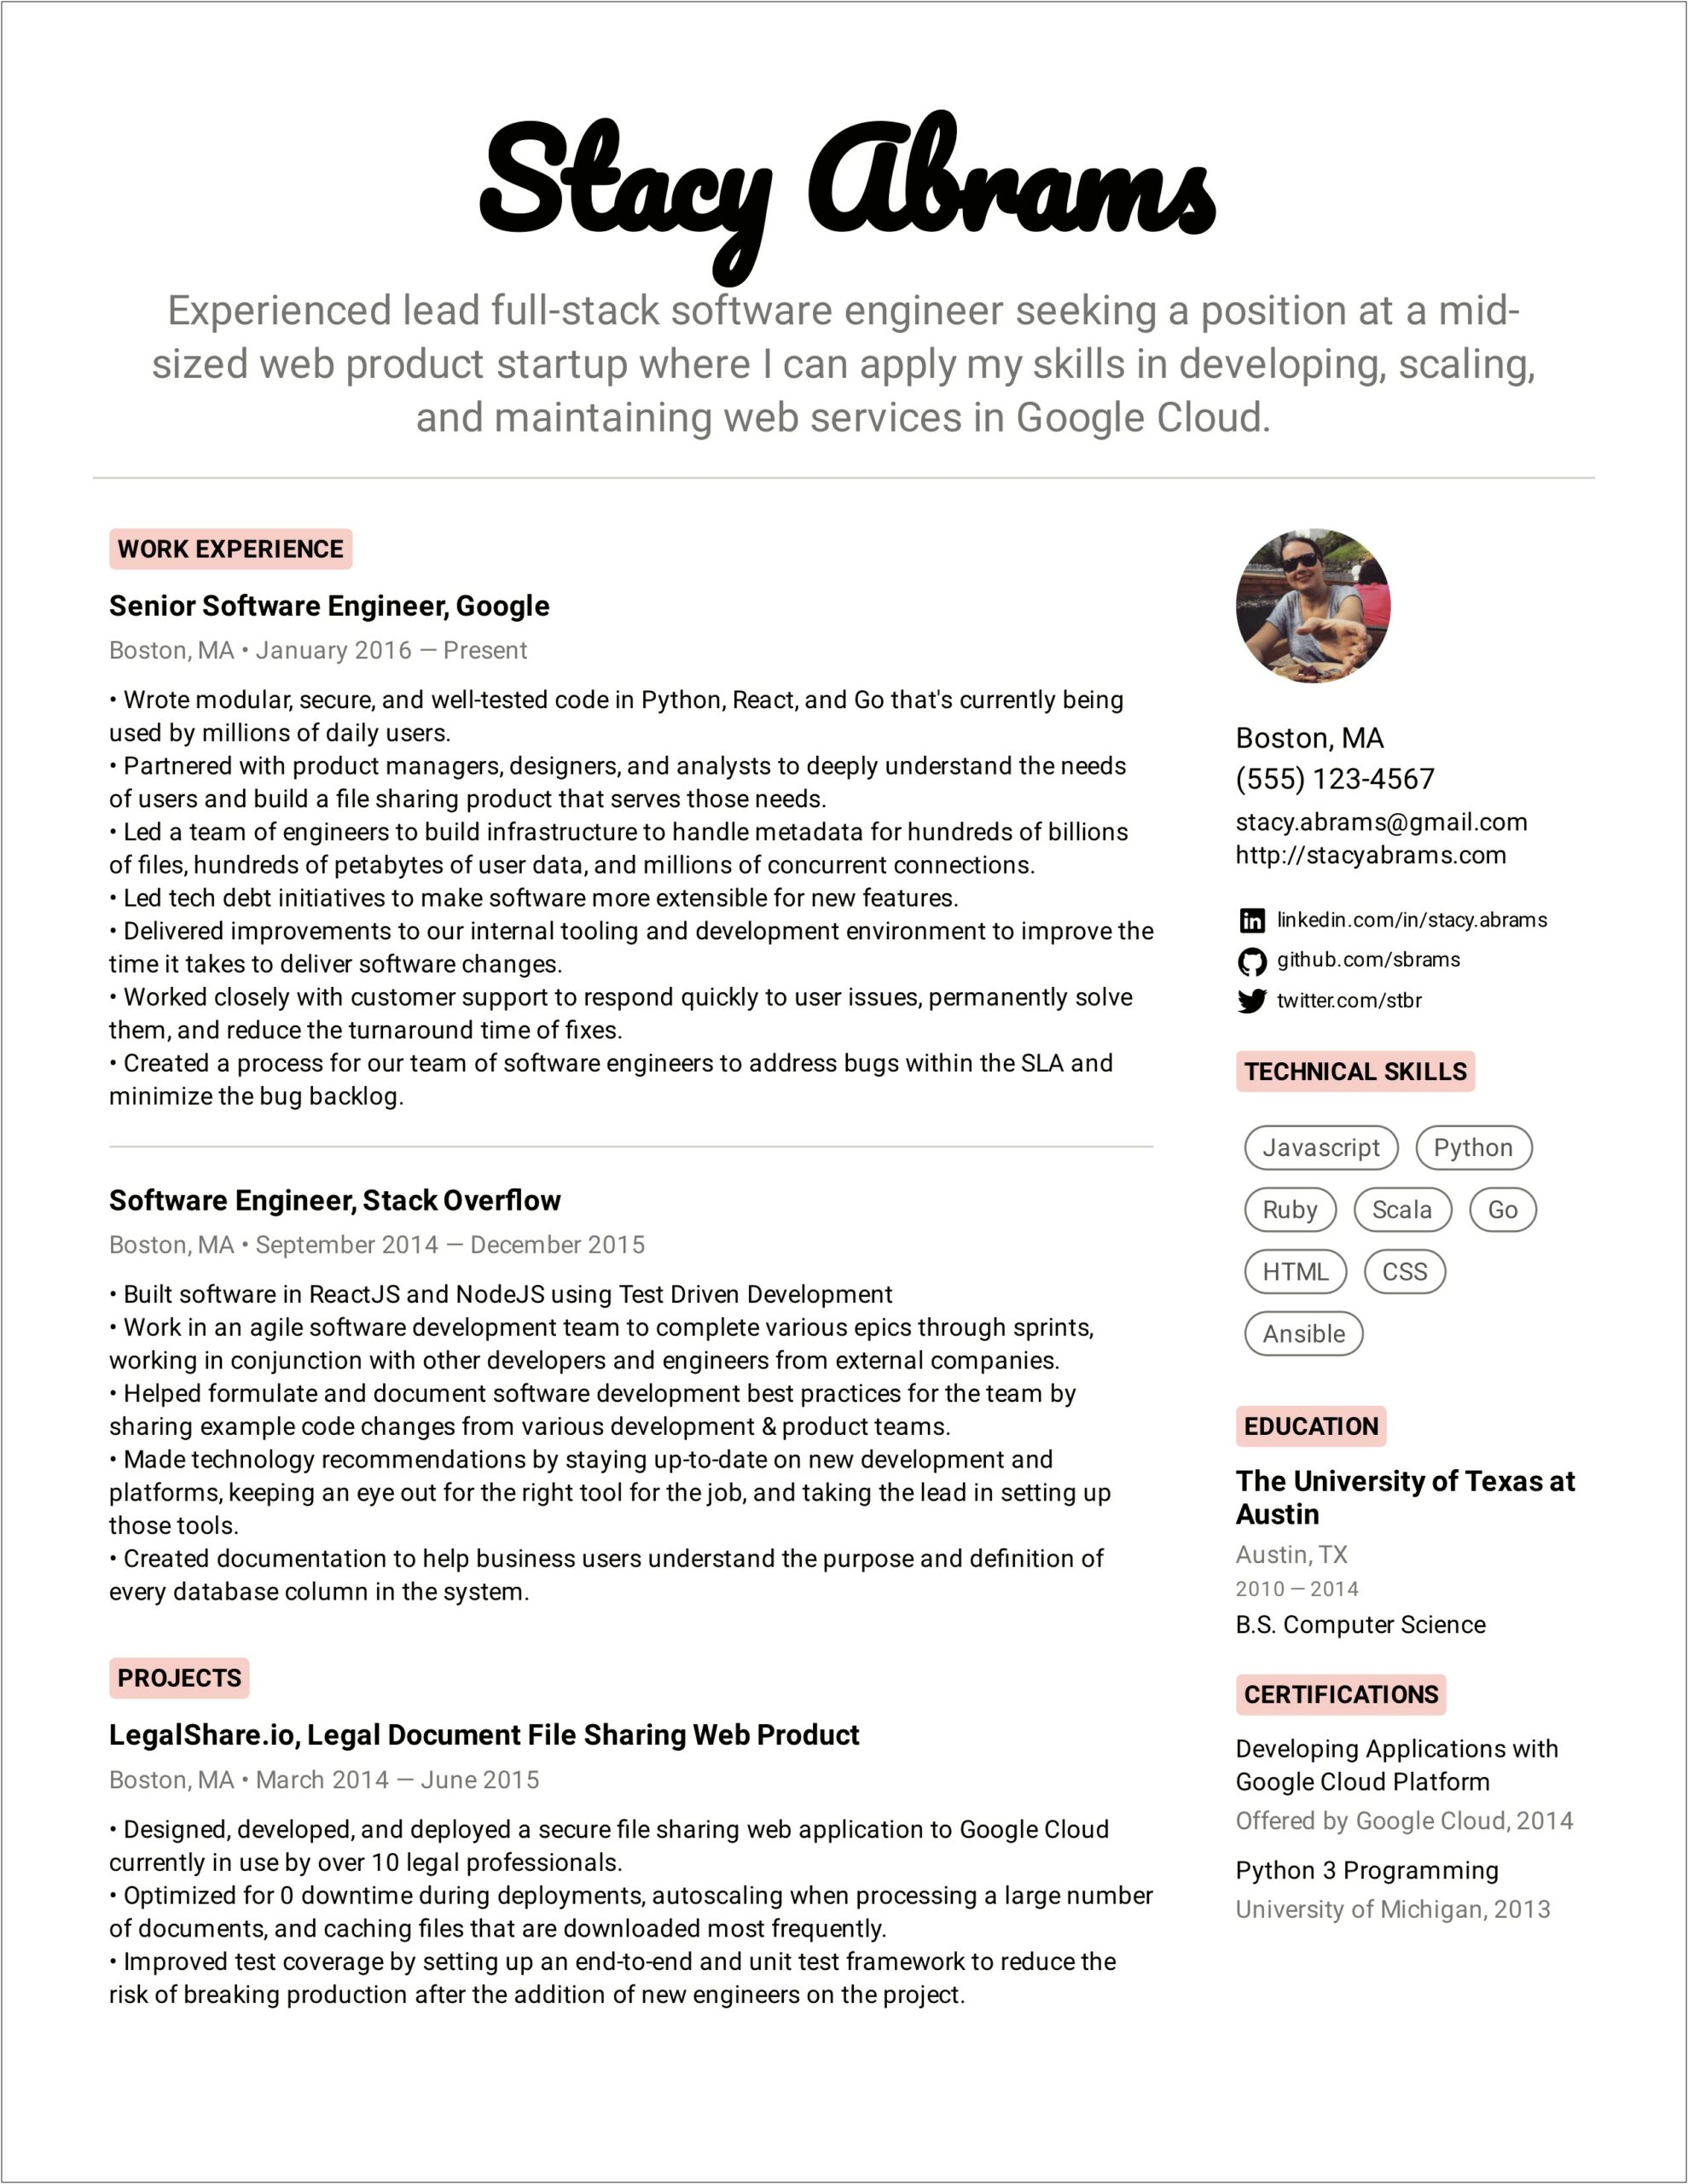 Sample Resume Format For Experienced Engineer